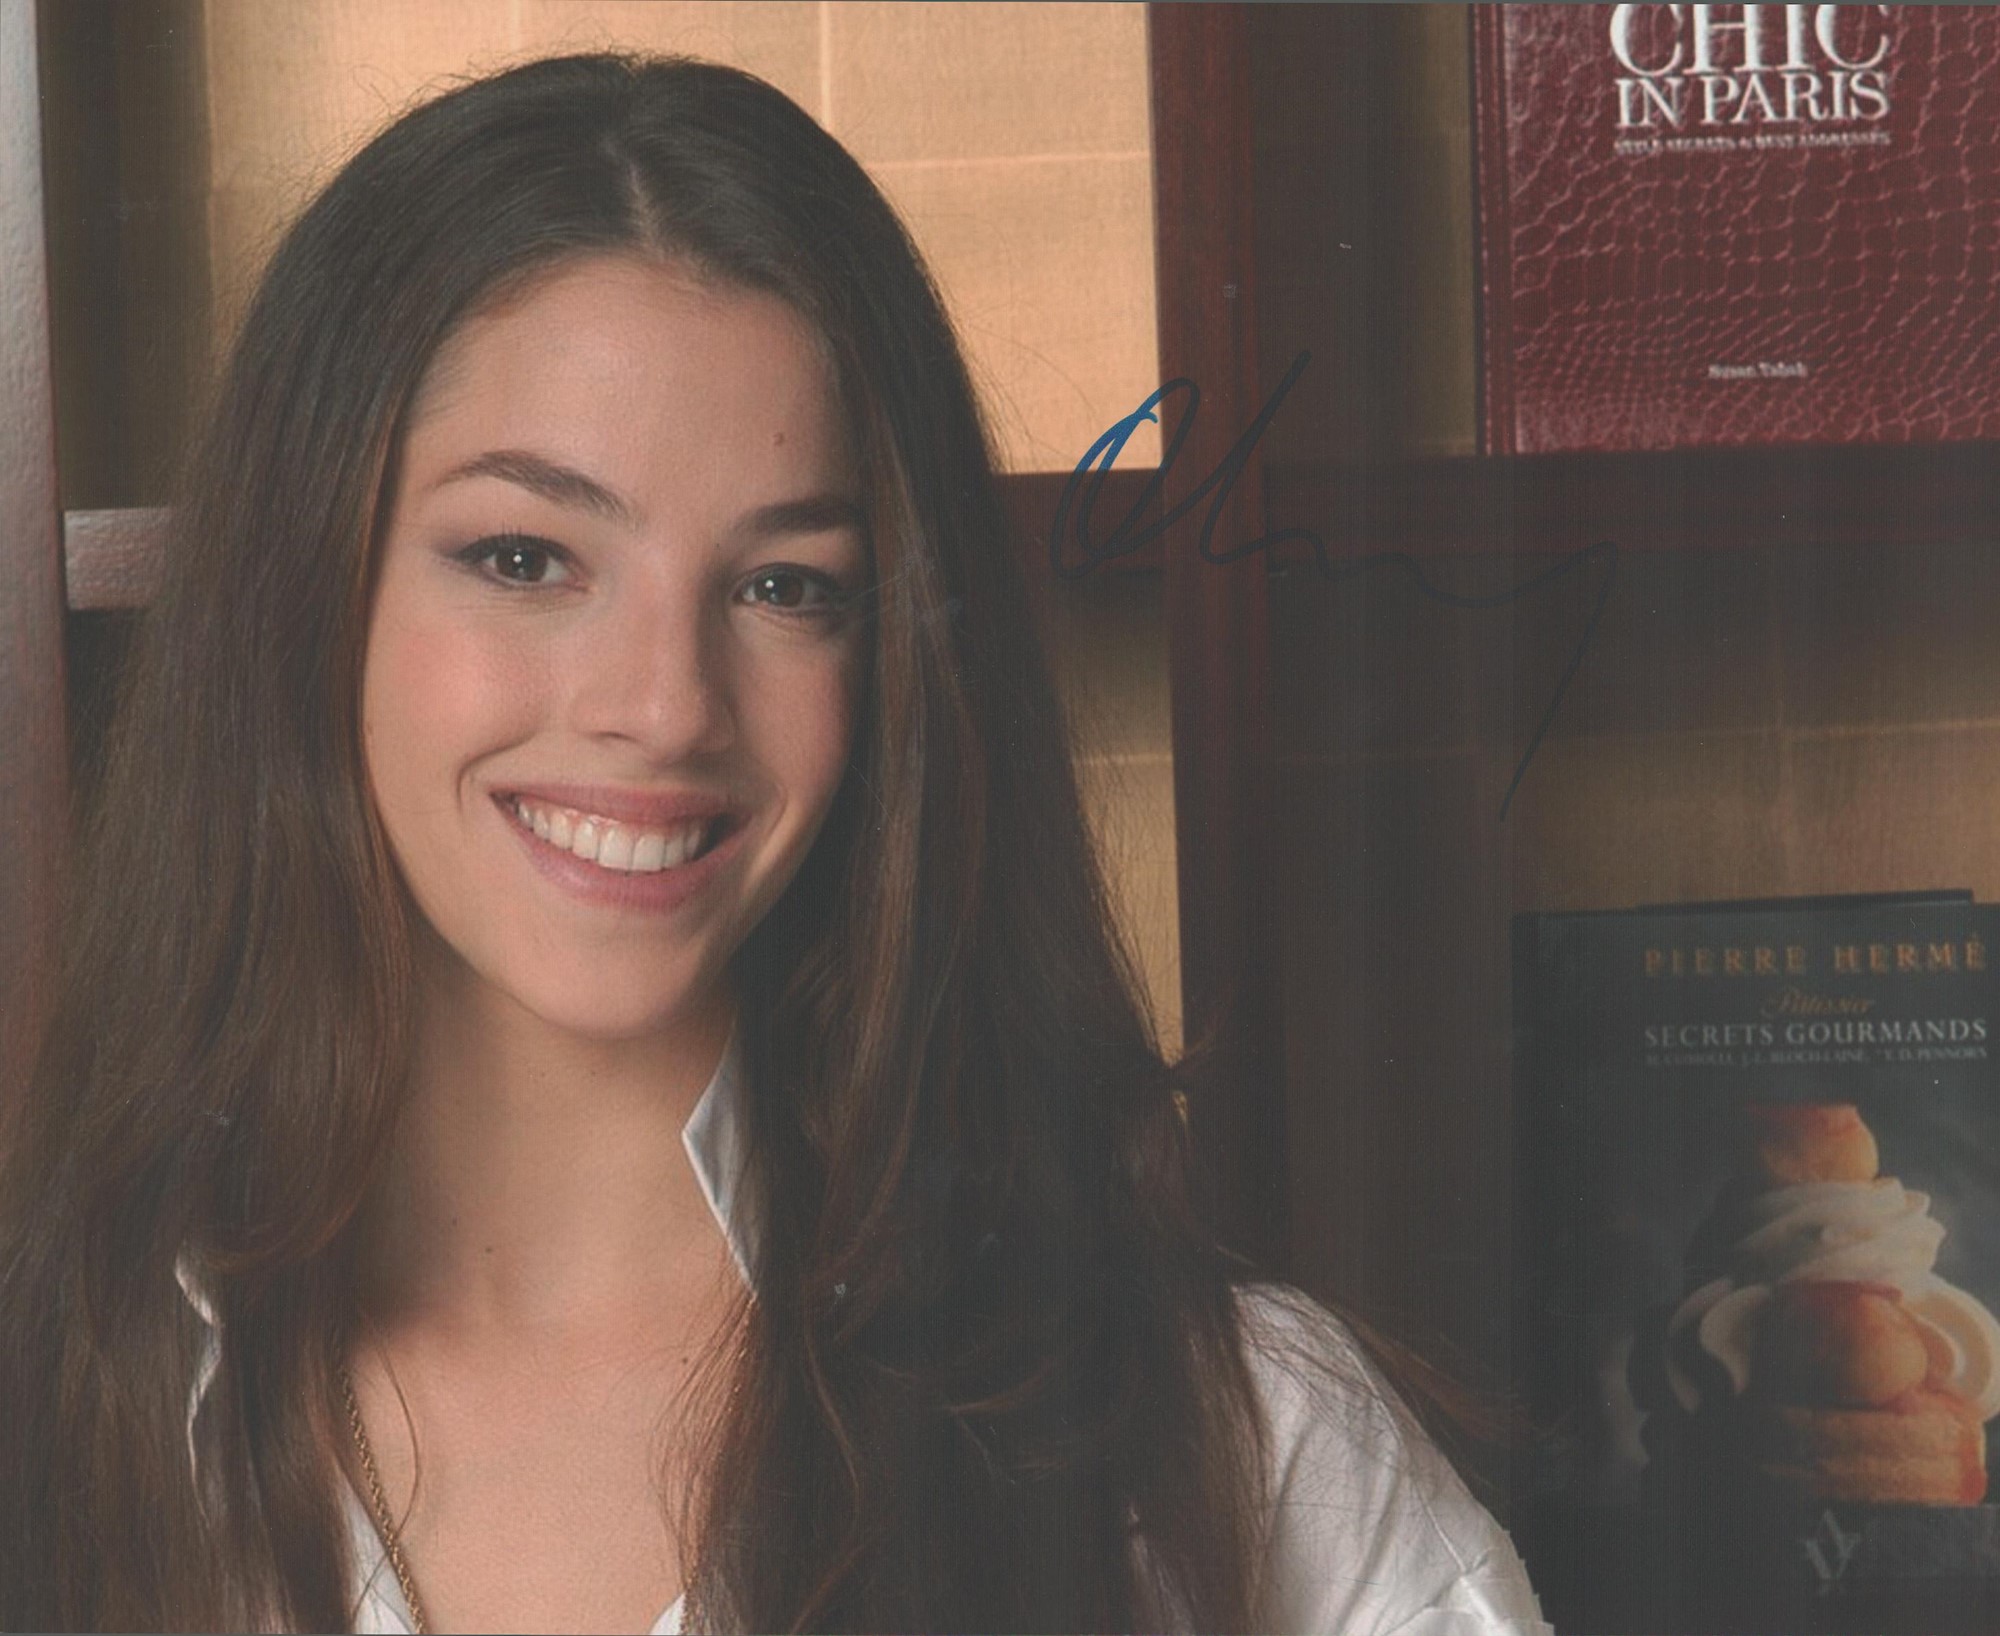 Olivia Thirlby American Actress Best Known For Starring In The Film Juno. Signed 10x8 Colour